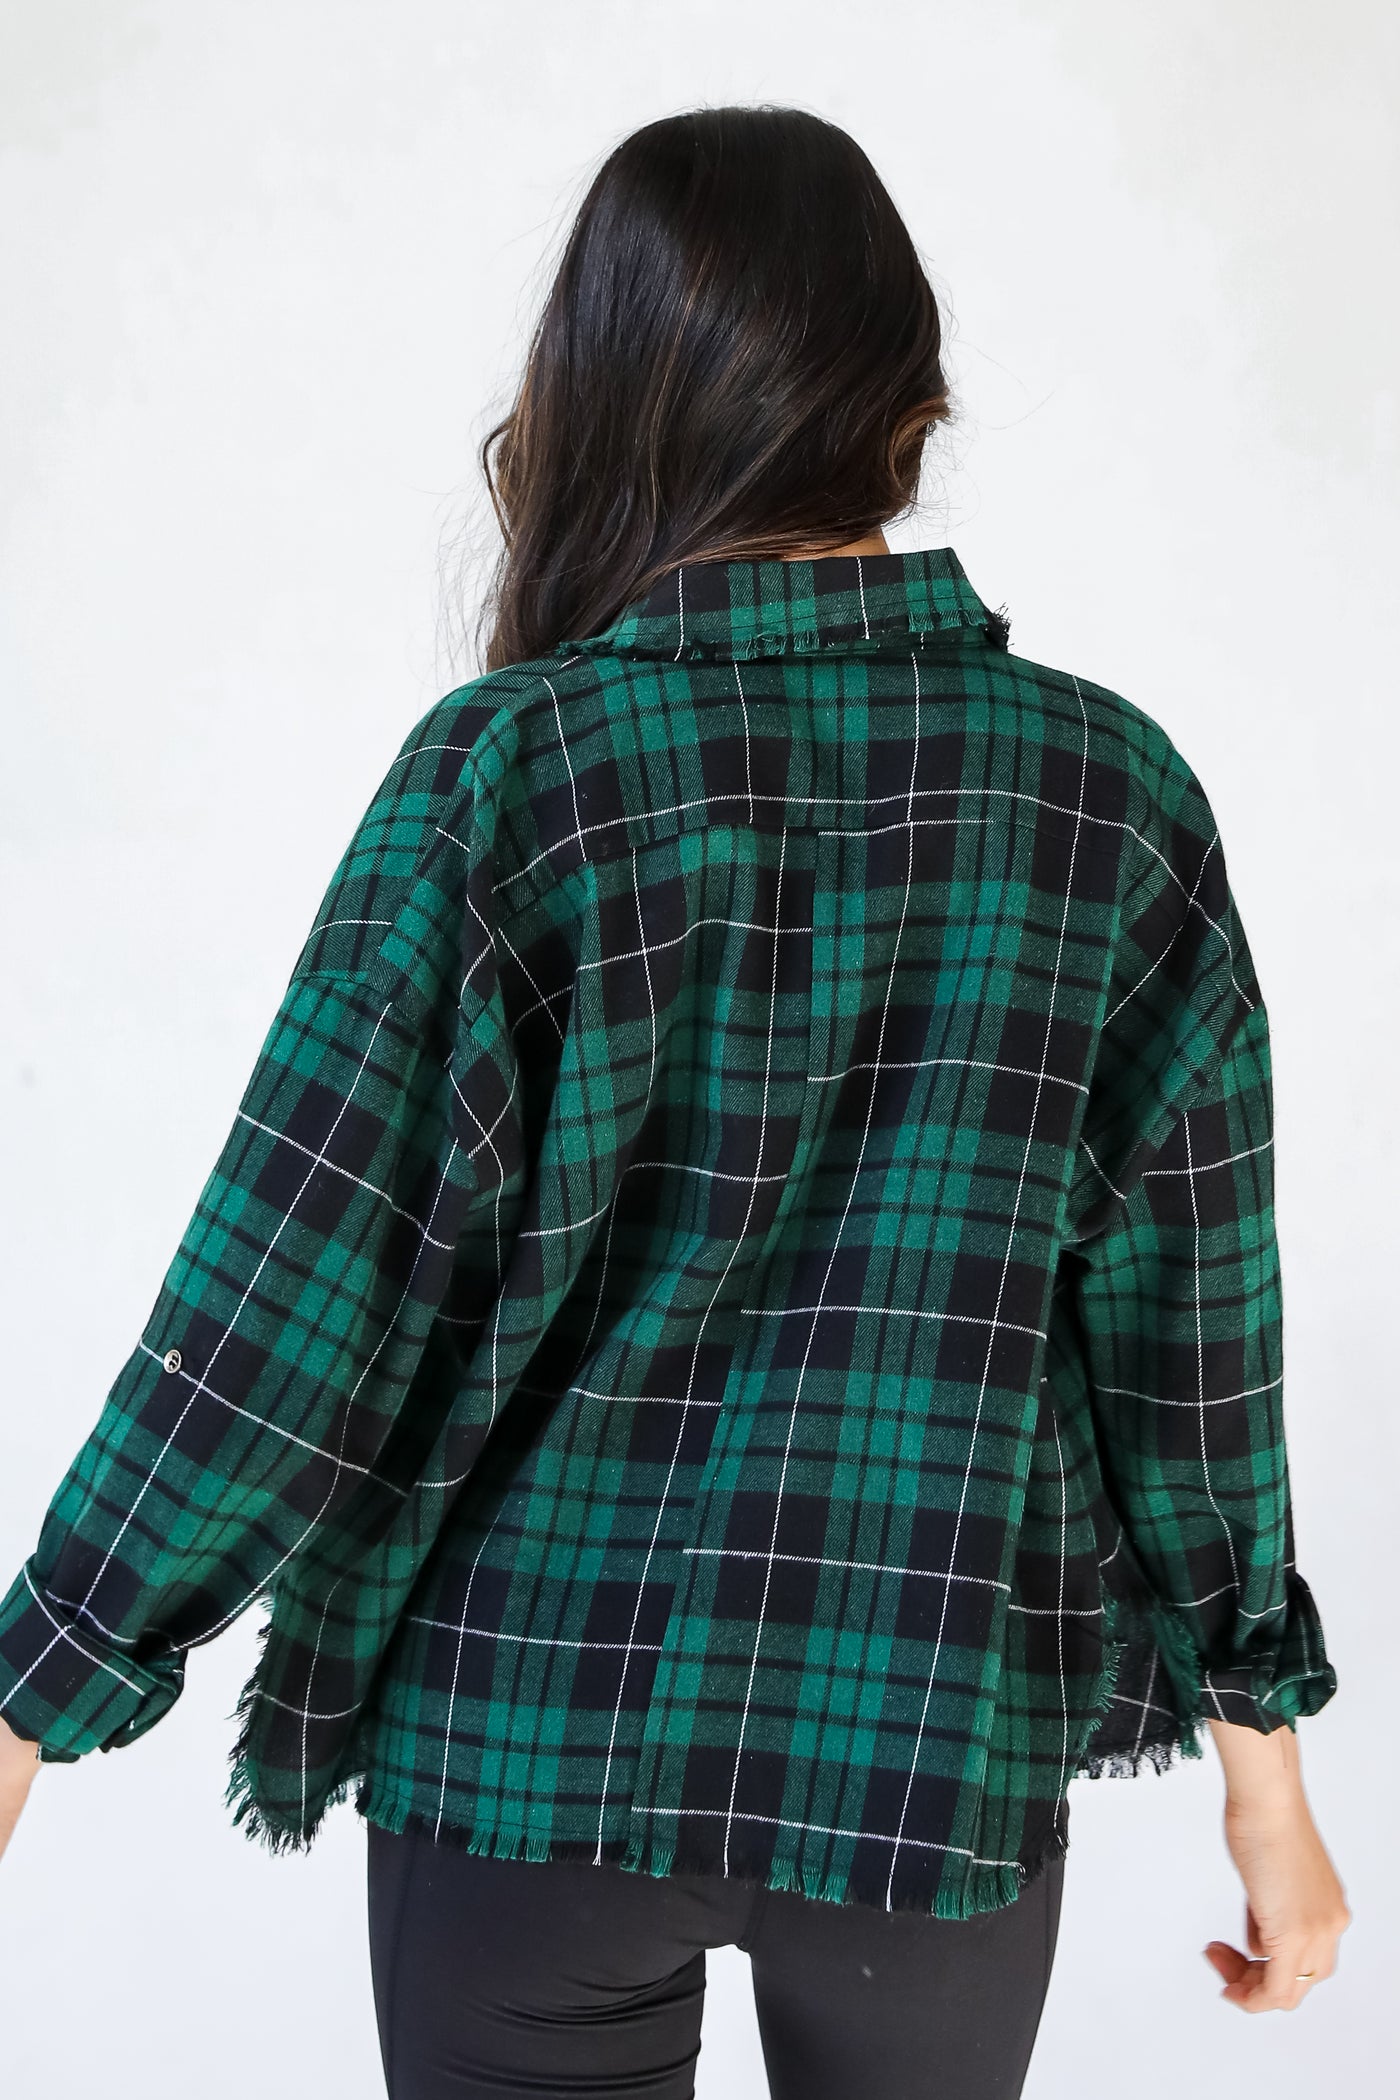 Flannel in hunter green back view